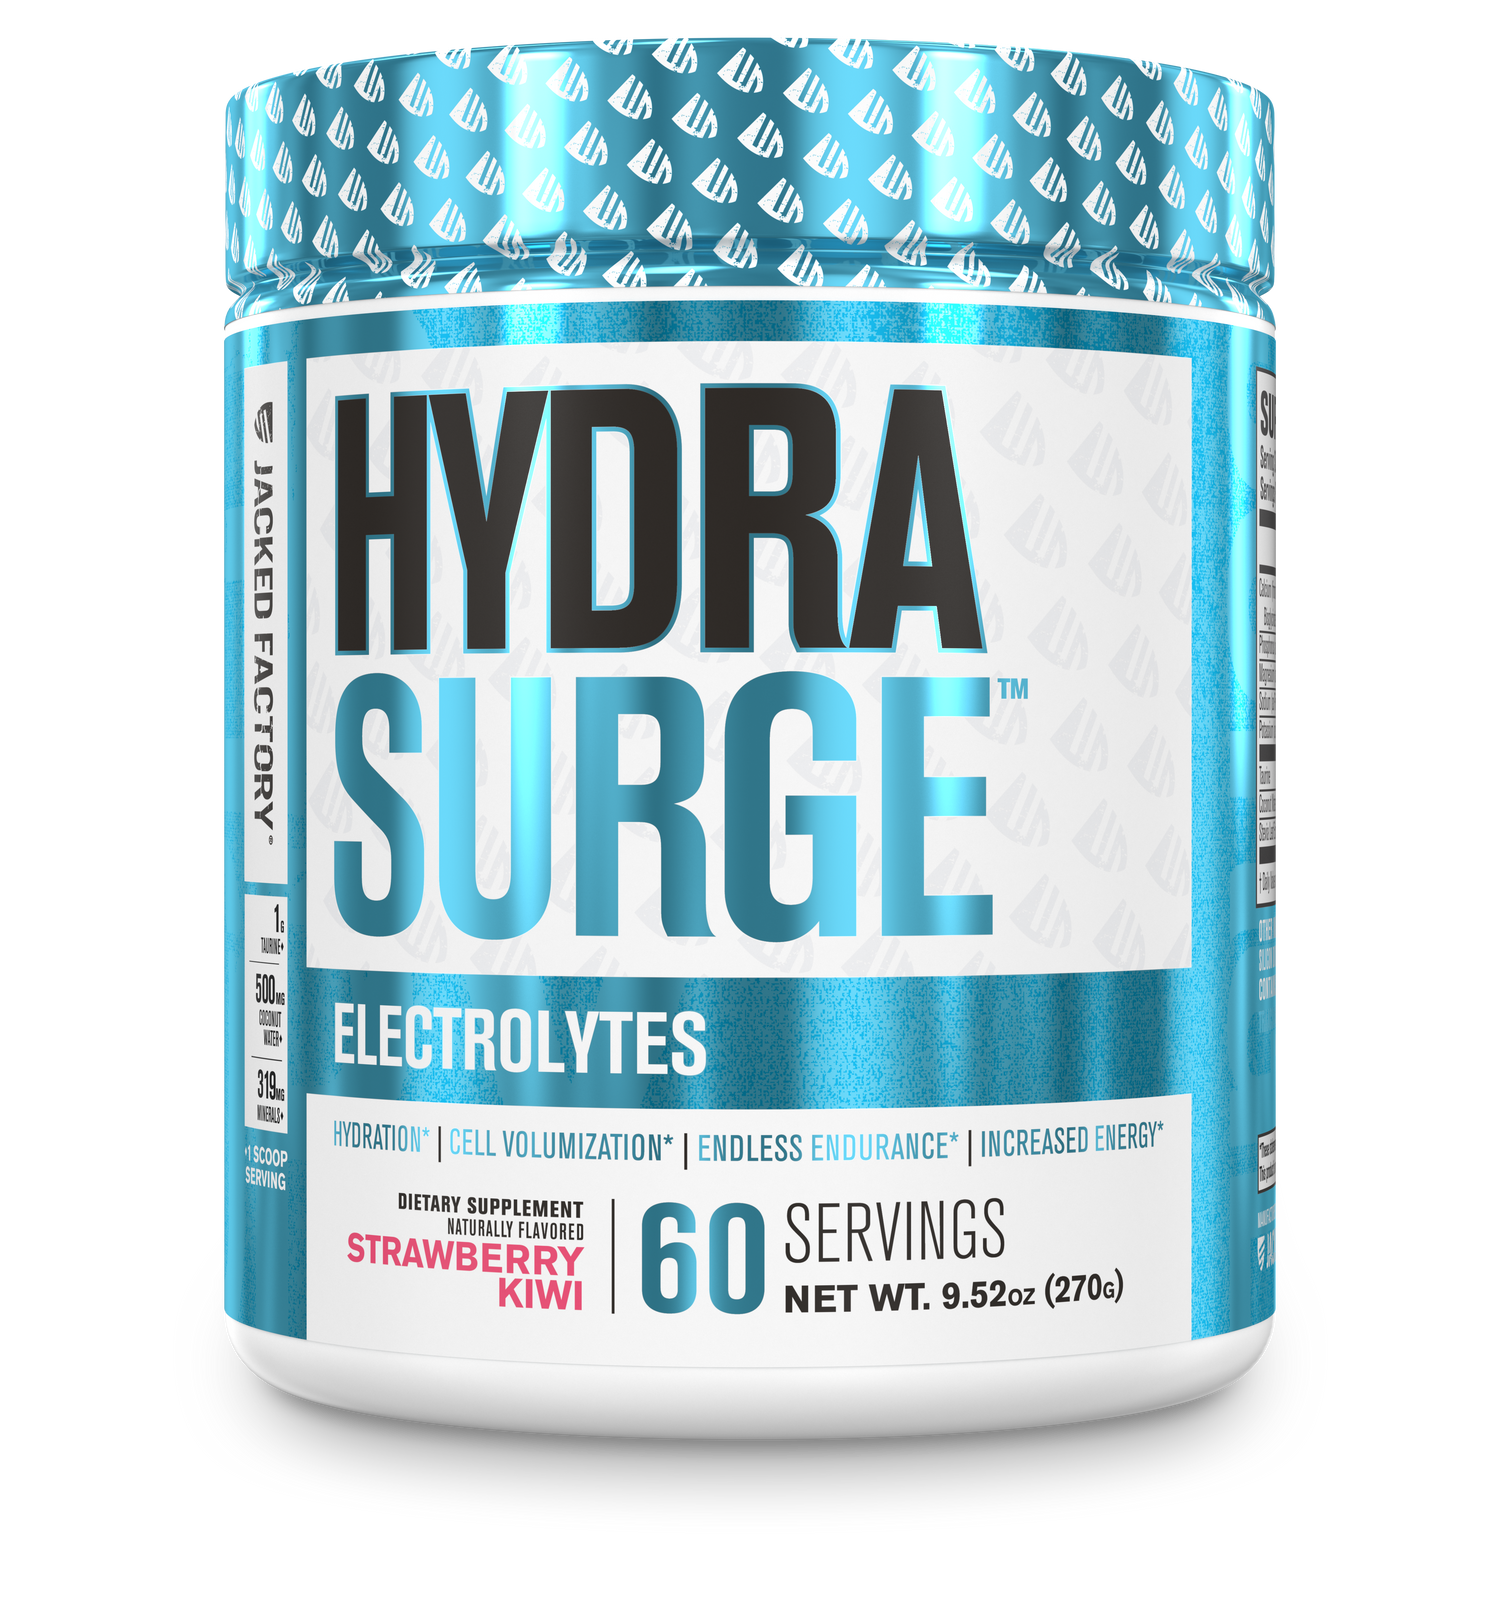 Jacked Factory's Strawberry Kiwi Hydrasurge electrolytes powder (60 servings) in a white bottle with light blue label